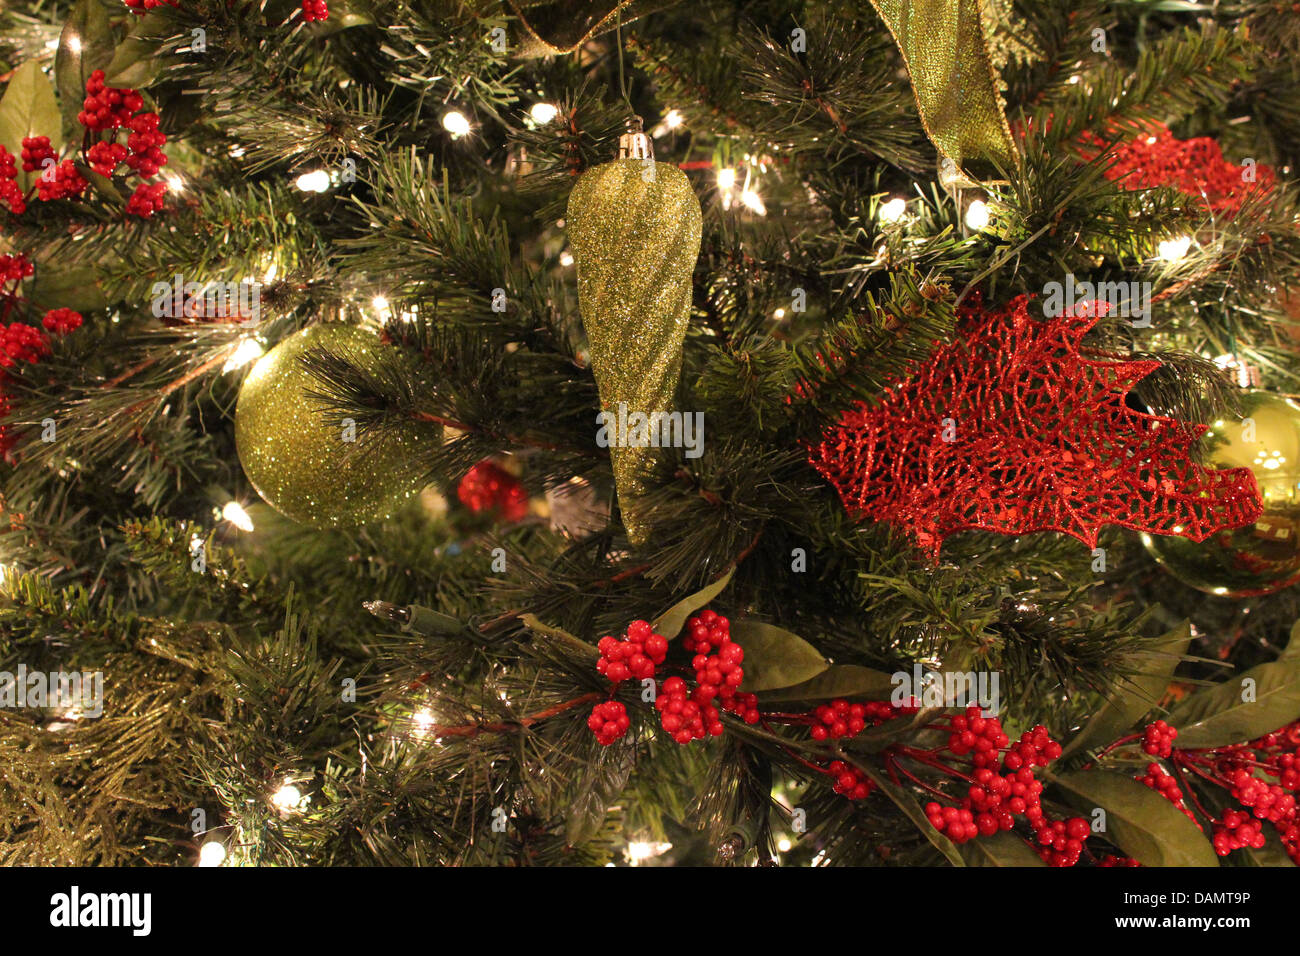 Colorful red and gold embellishments on green pine tree branches with little twinkling lights wound throughout. Stock Photo